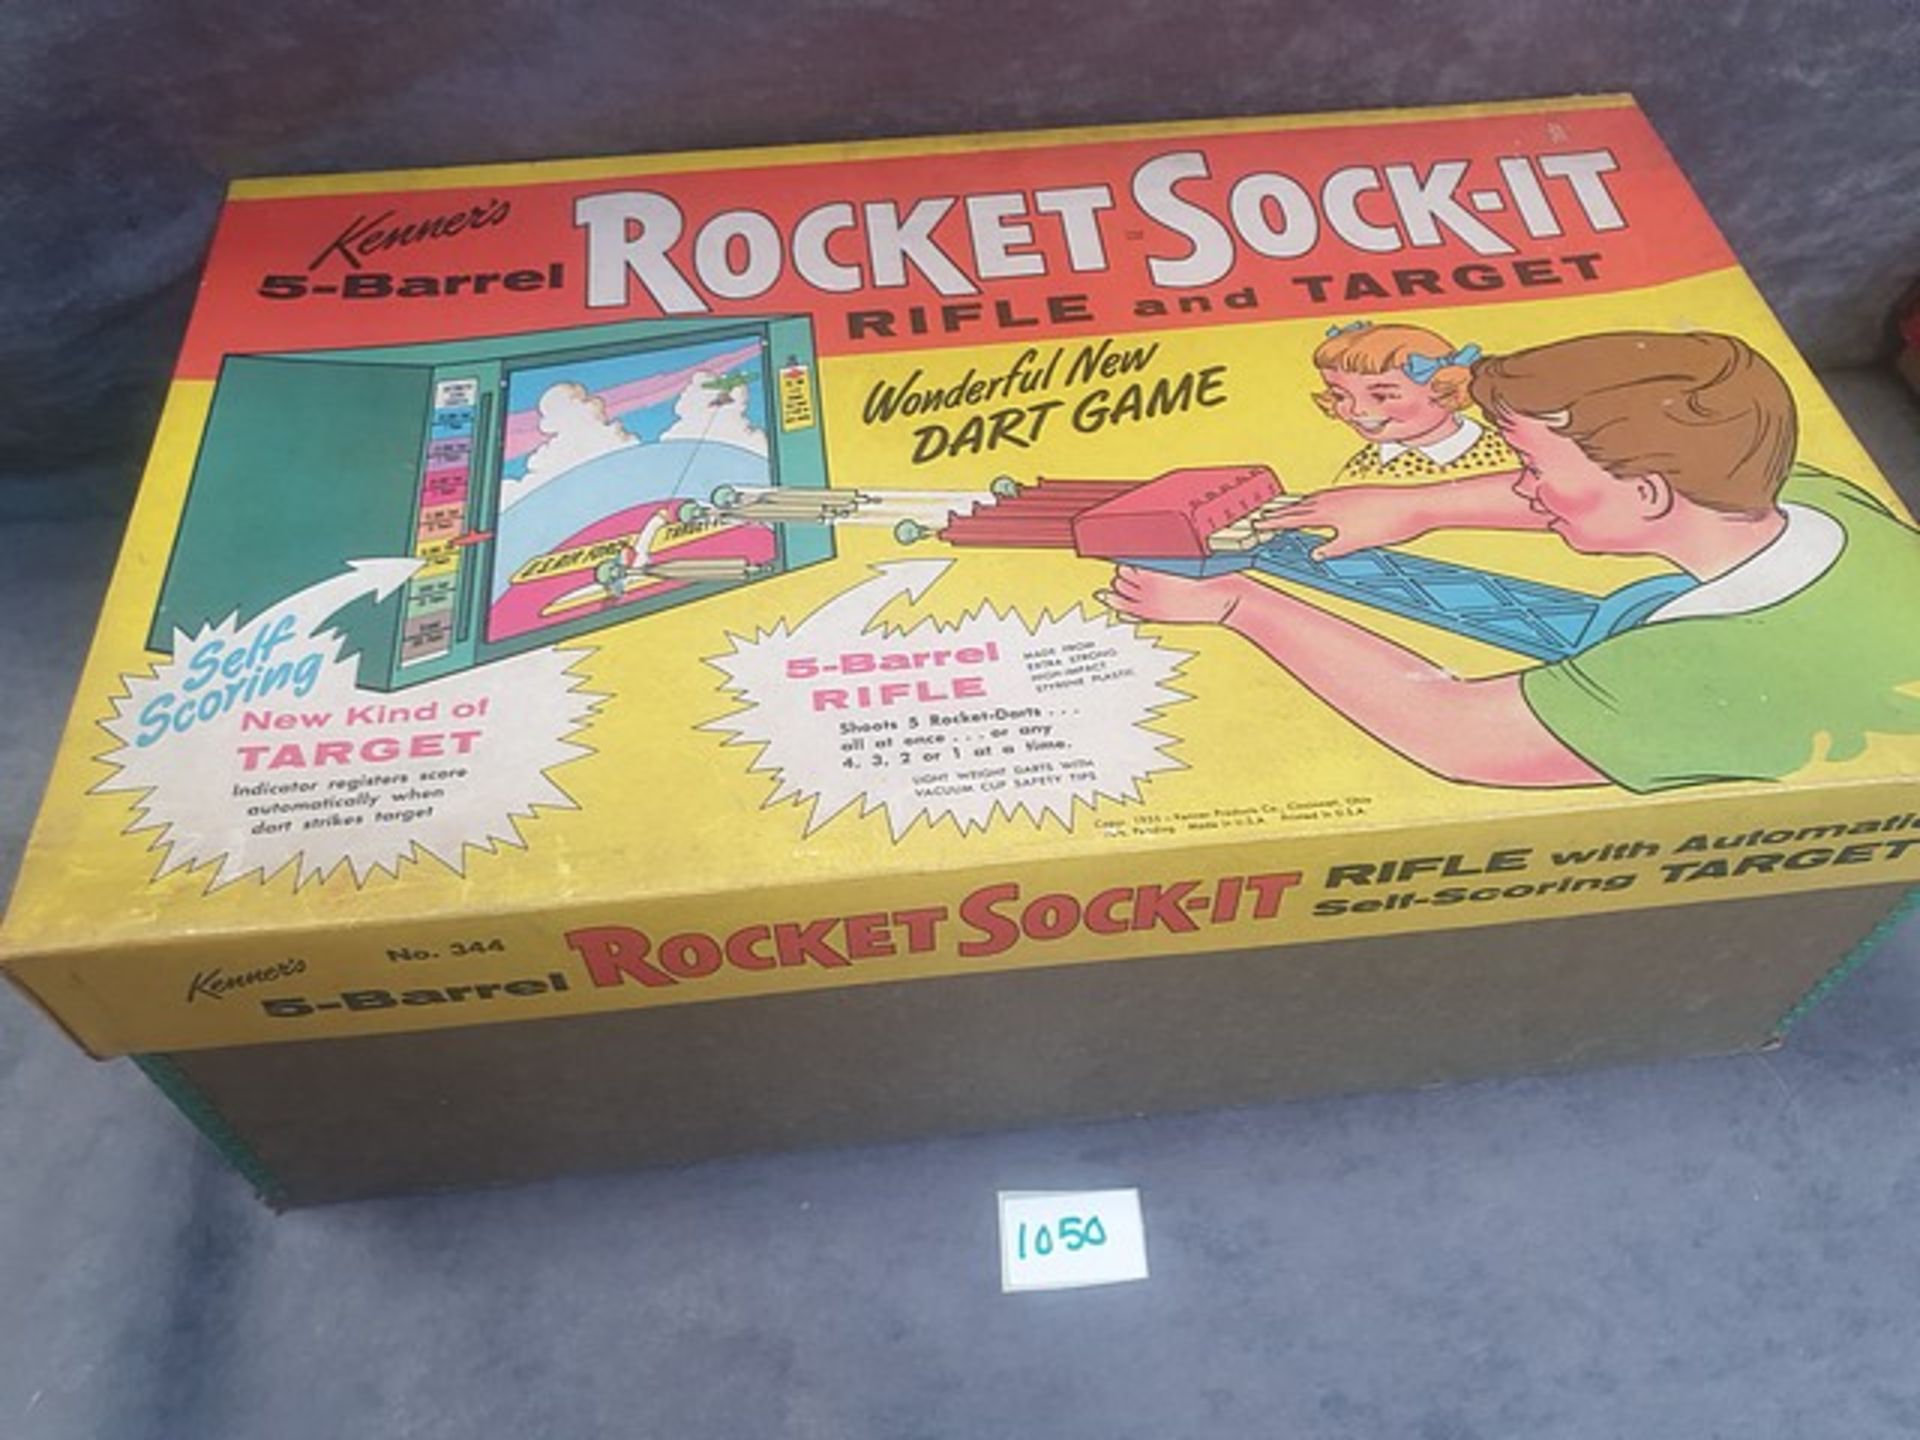 Kenners 5-Barrel Rocket Sock-It Rifle & Target Wonderful New Dart Game Complete With Box - Image 2 of 2